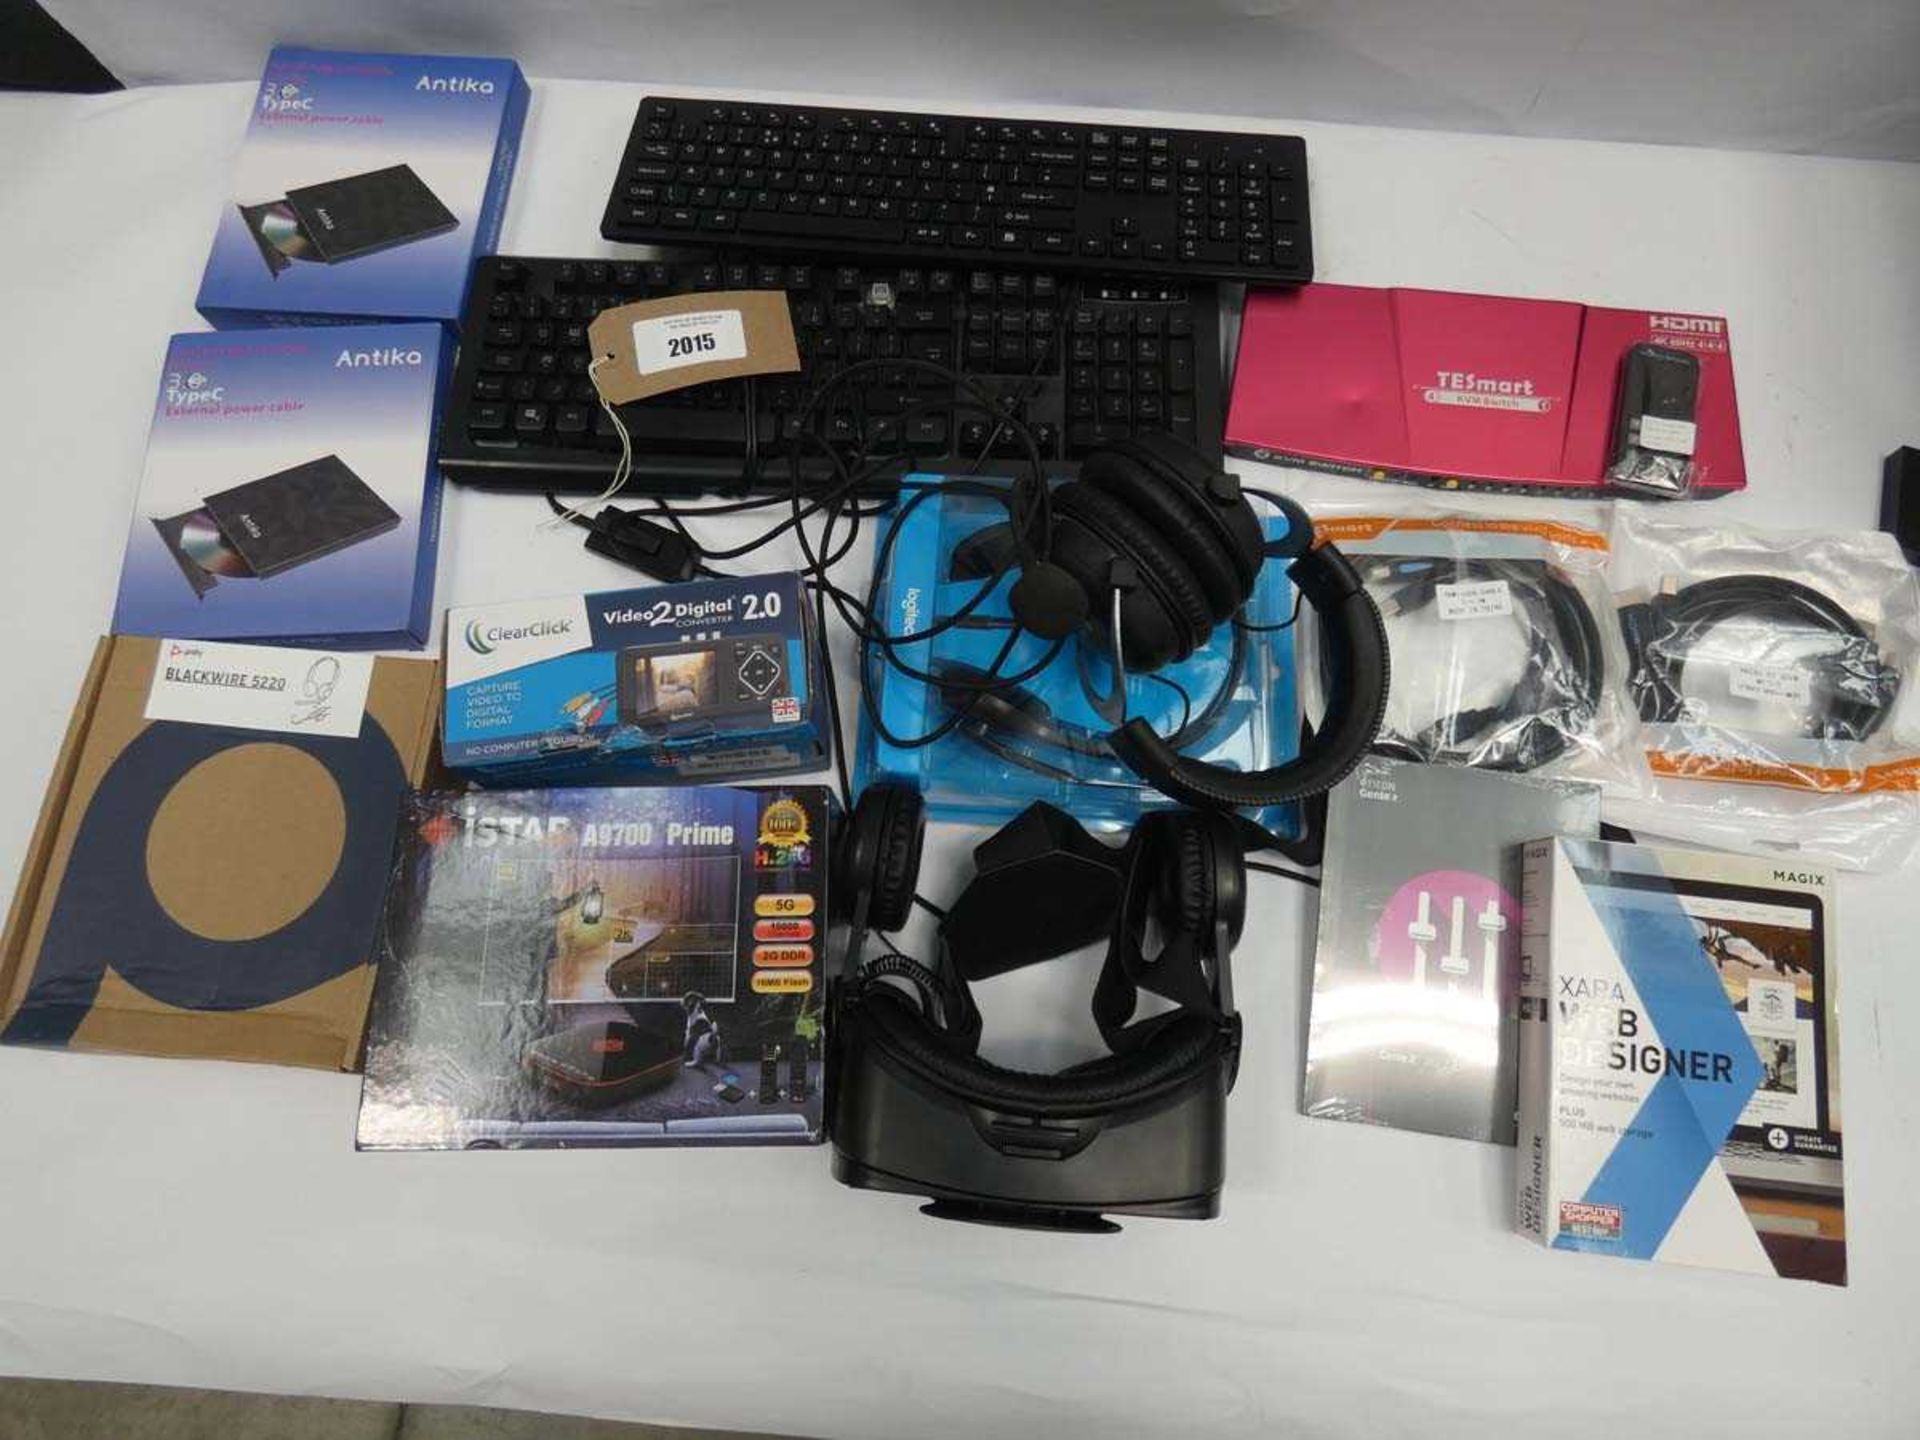 +VAT Mixed lot of devices/accessories; keyboards, headsets, KVM switch, CD drives, etc